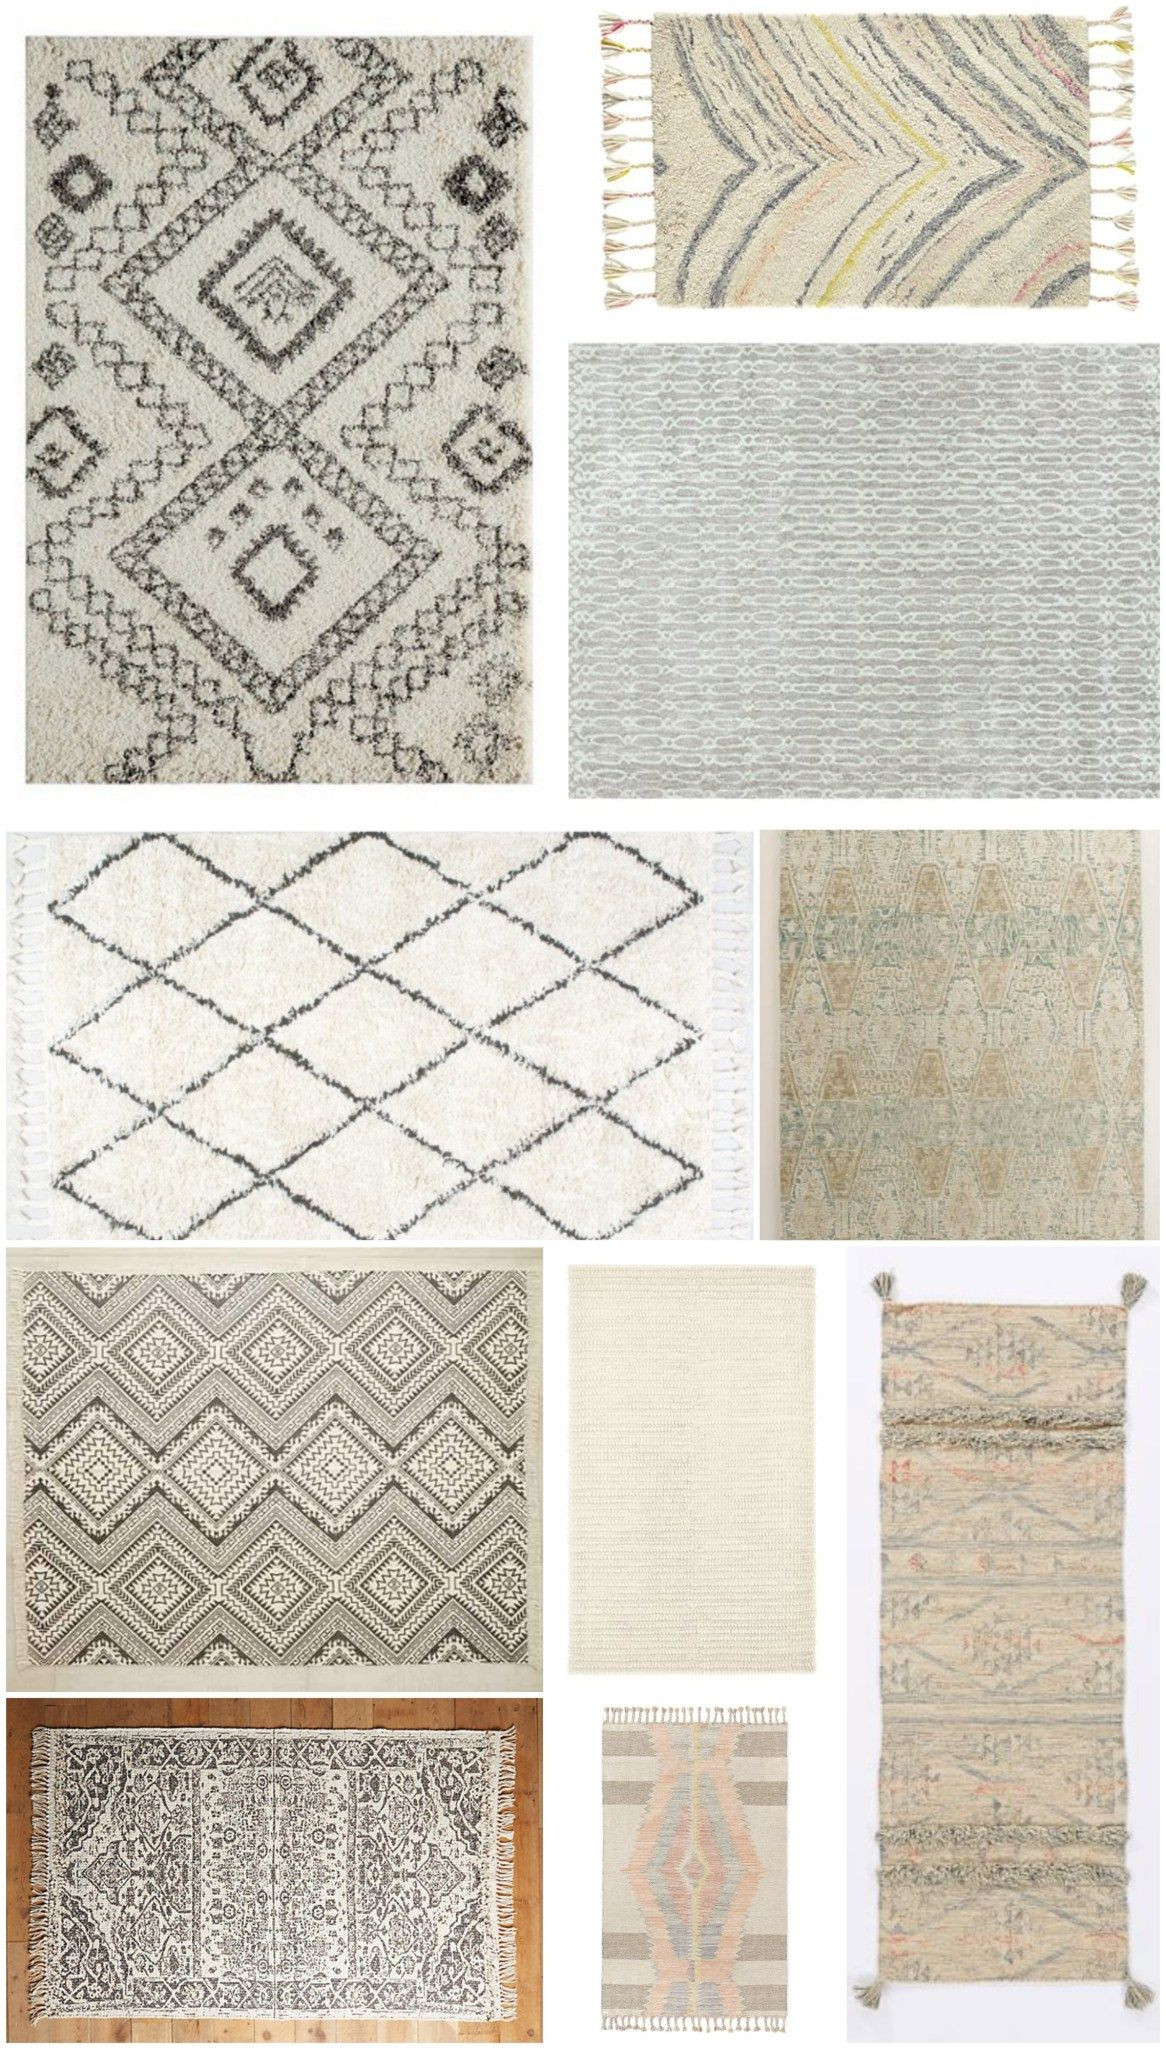 Neutral Rugs For Living Room
 10 Best Neutral Rugs That Make A Statement With images